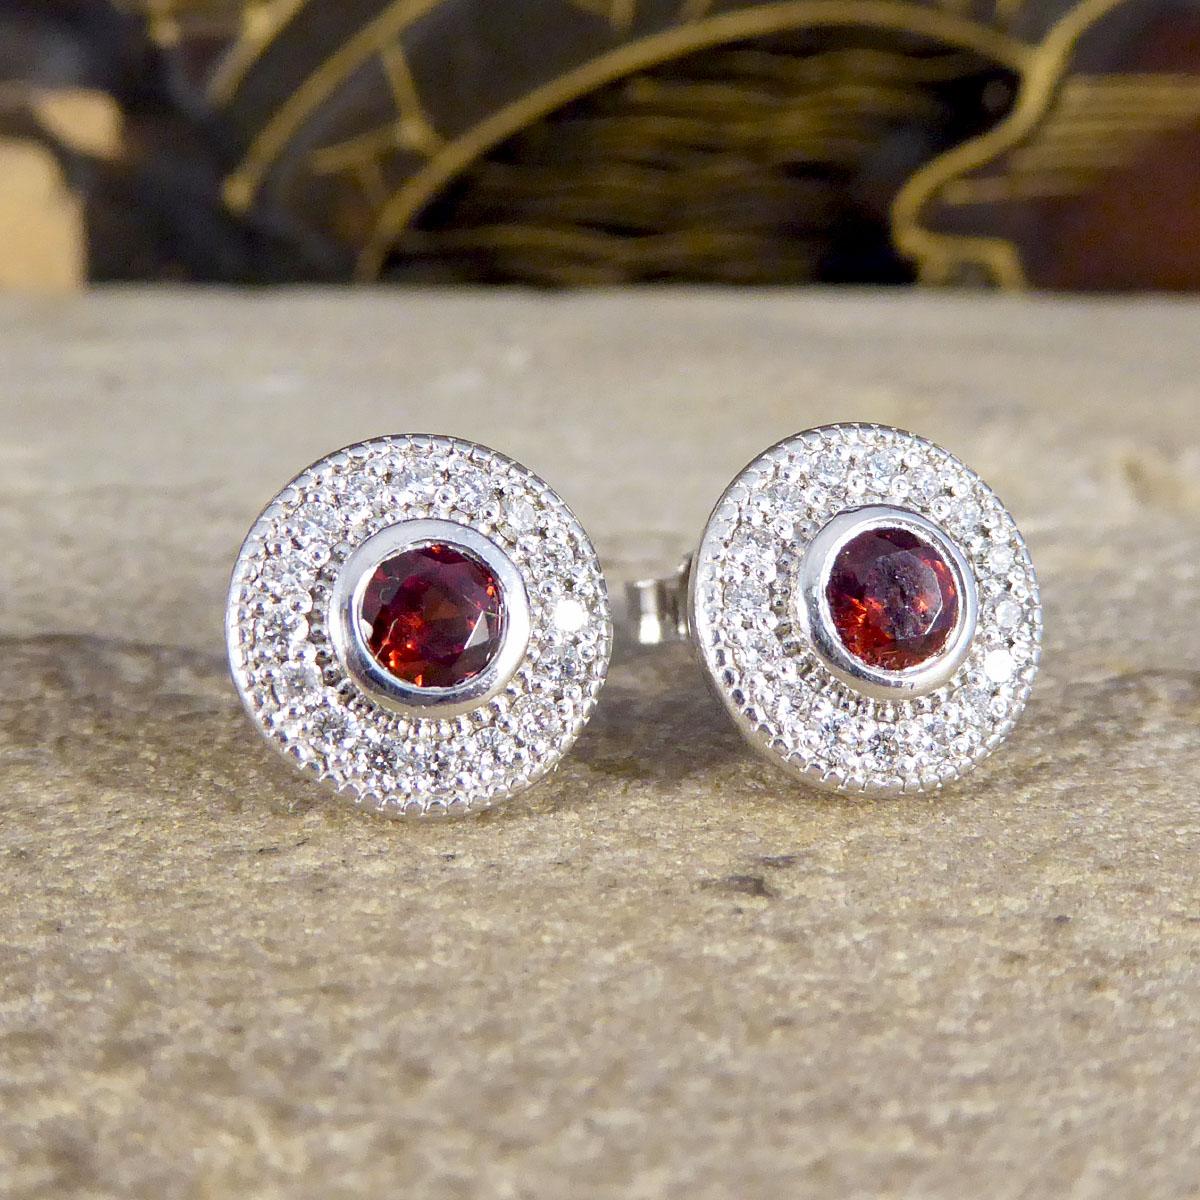 Round Cut Art Deco Style Modern Garnet and Diamond Cluster Earrings in 9 Carat White Gold